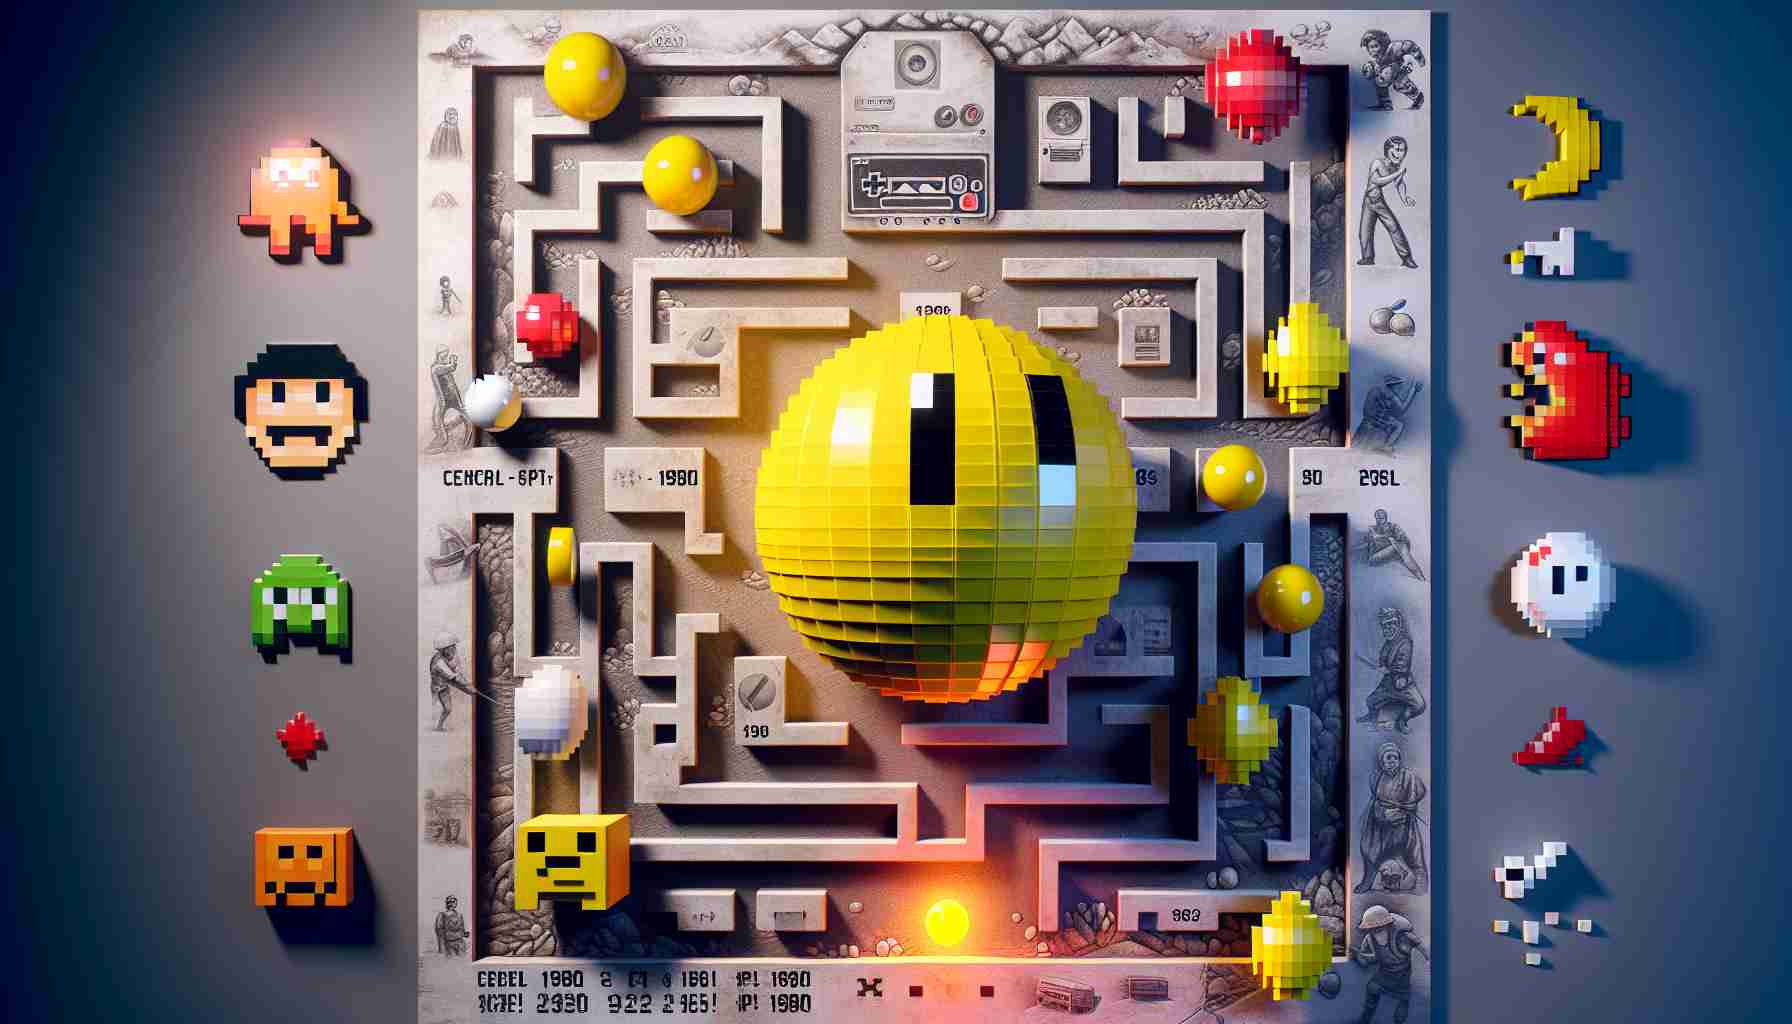 Google's interactive doodle celebrates iconic video game PAC MAN